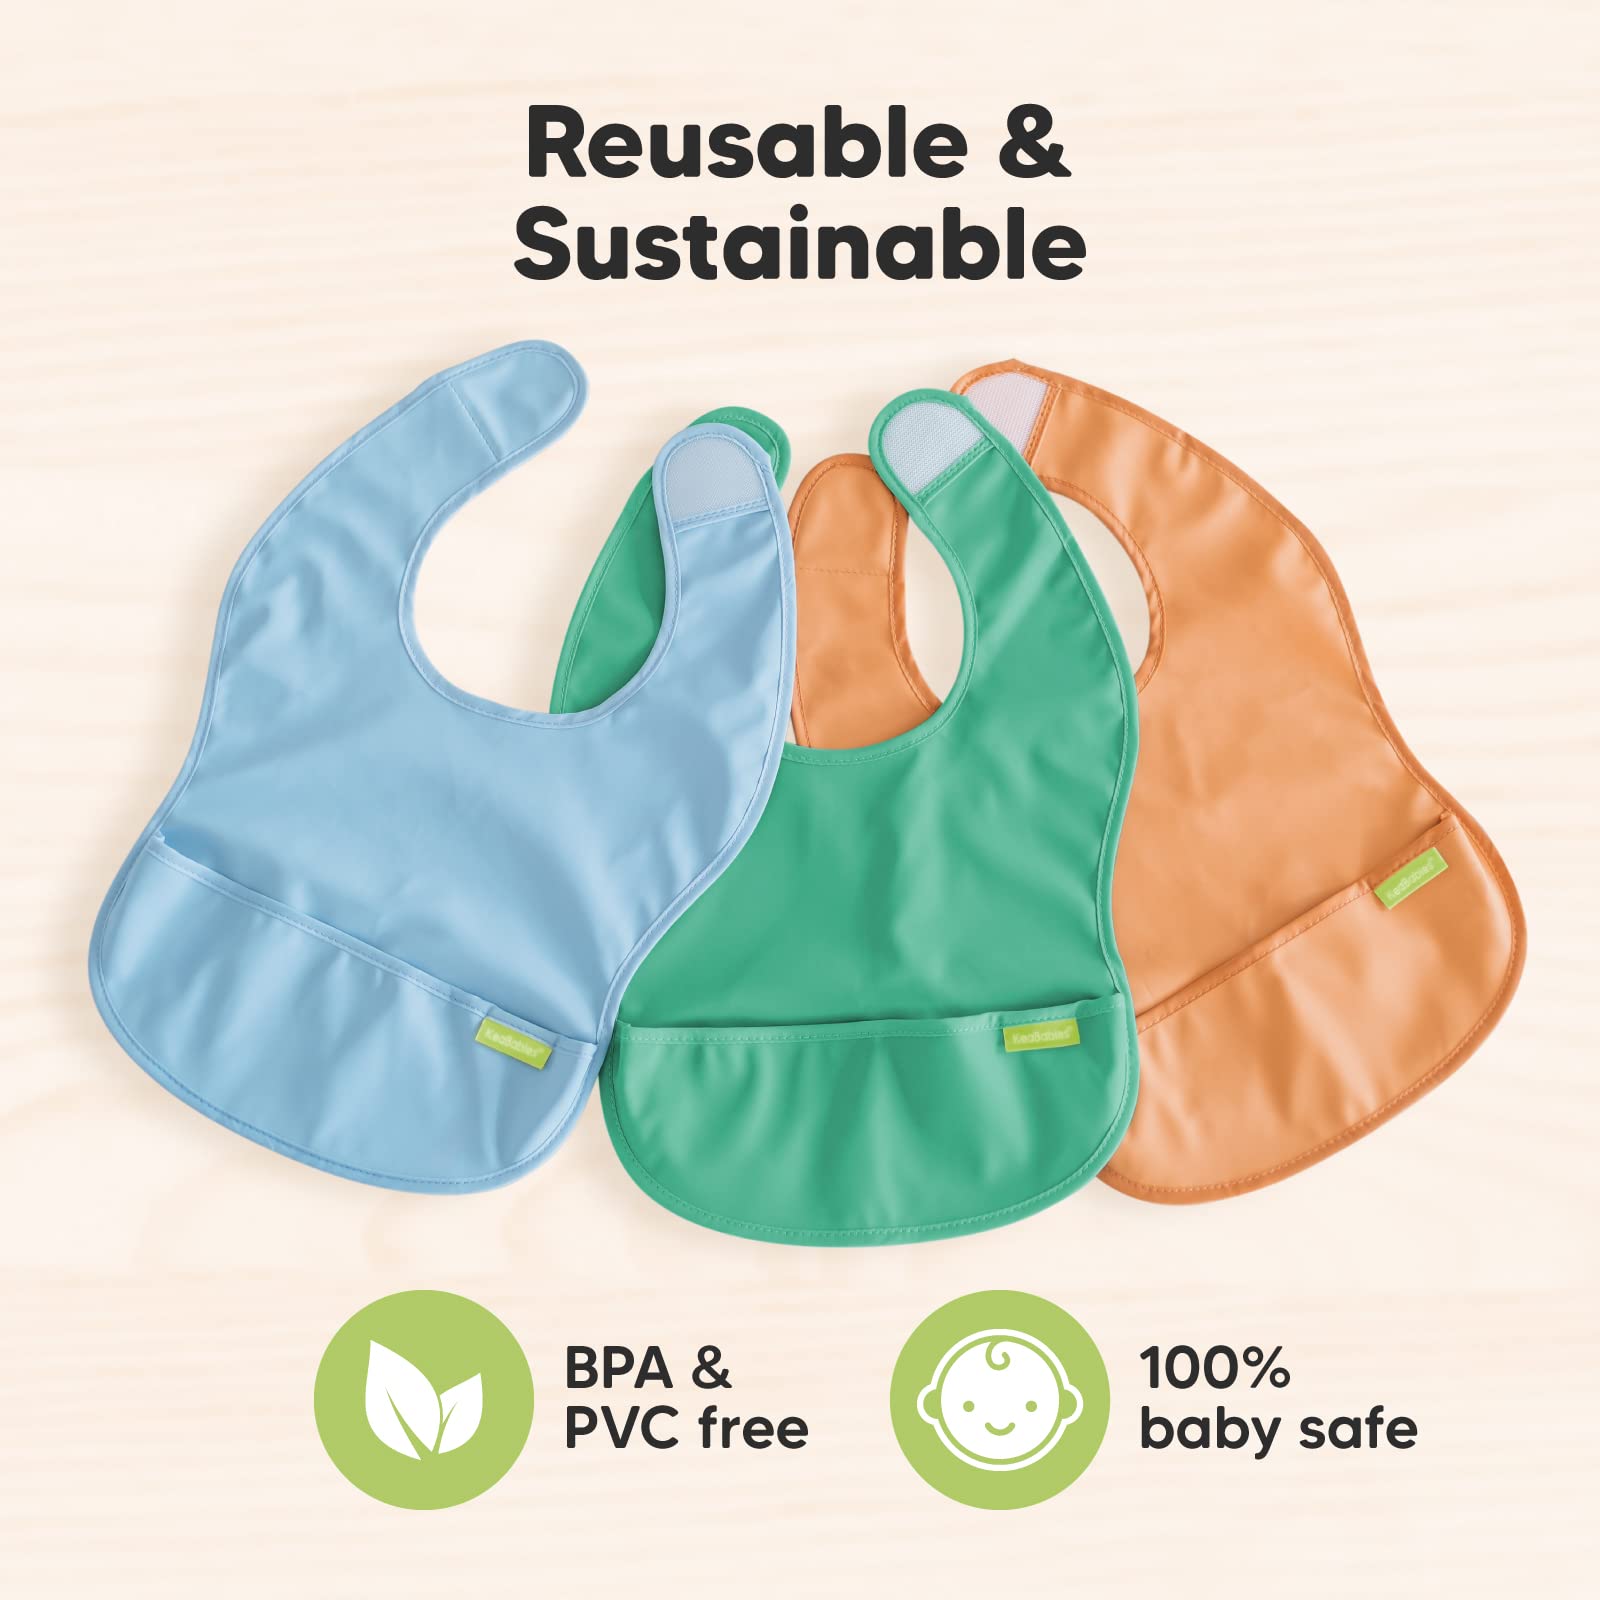 3-Pack Waterproof Baby Bibs for Eating - Lightweight Baby Bib with Food Catcher, Mess Proof Toddler Bibs, Waterproof Bibs for Baby Boys, Baby Girls, Feeding Bibs, Drool Bibs, Baby Food Bibs (Basics)